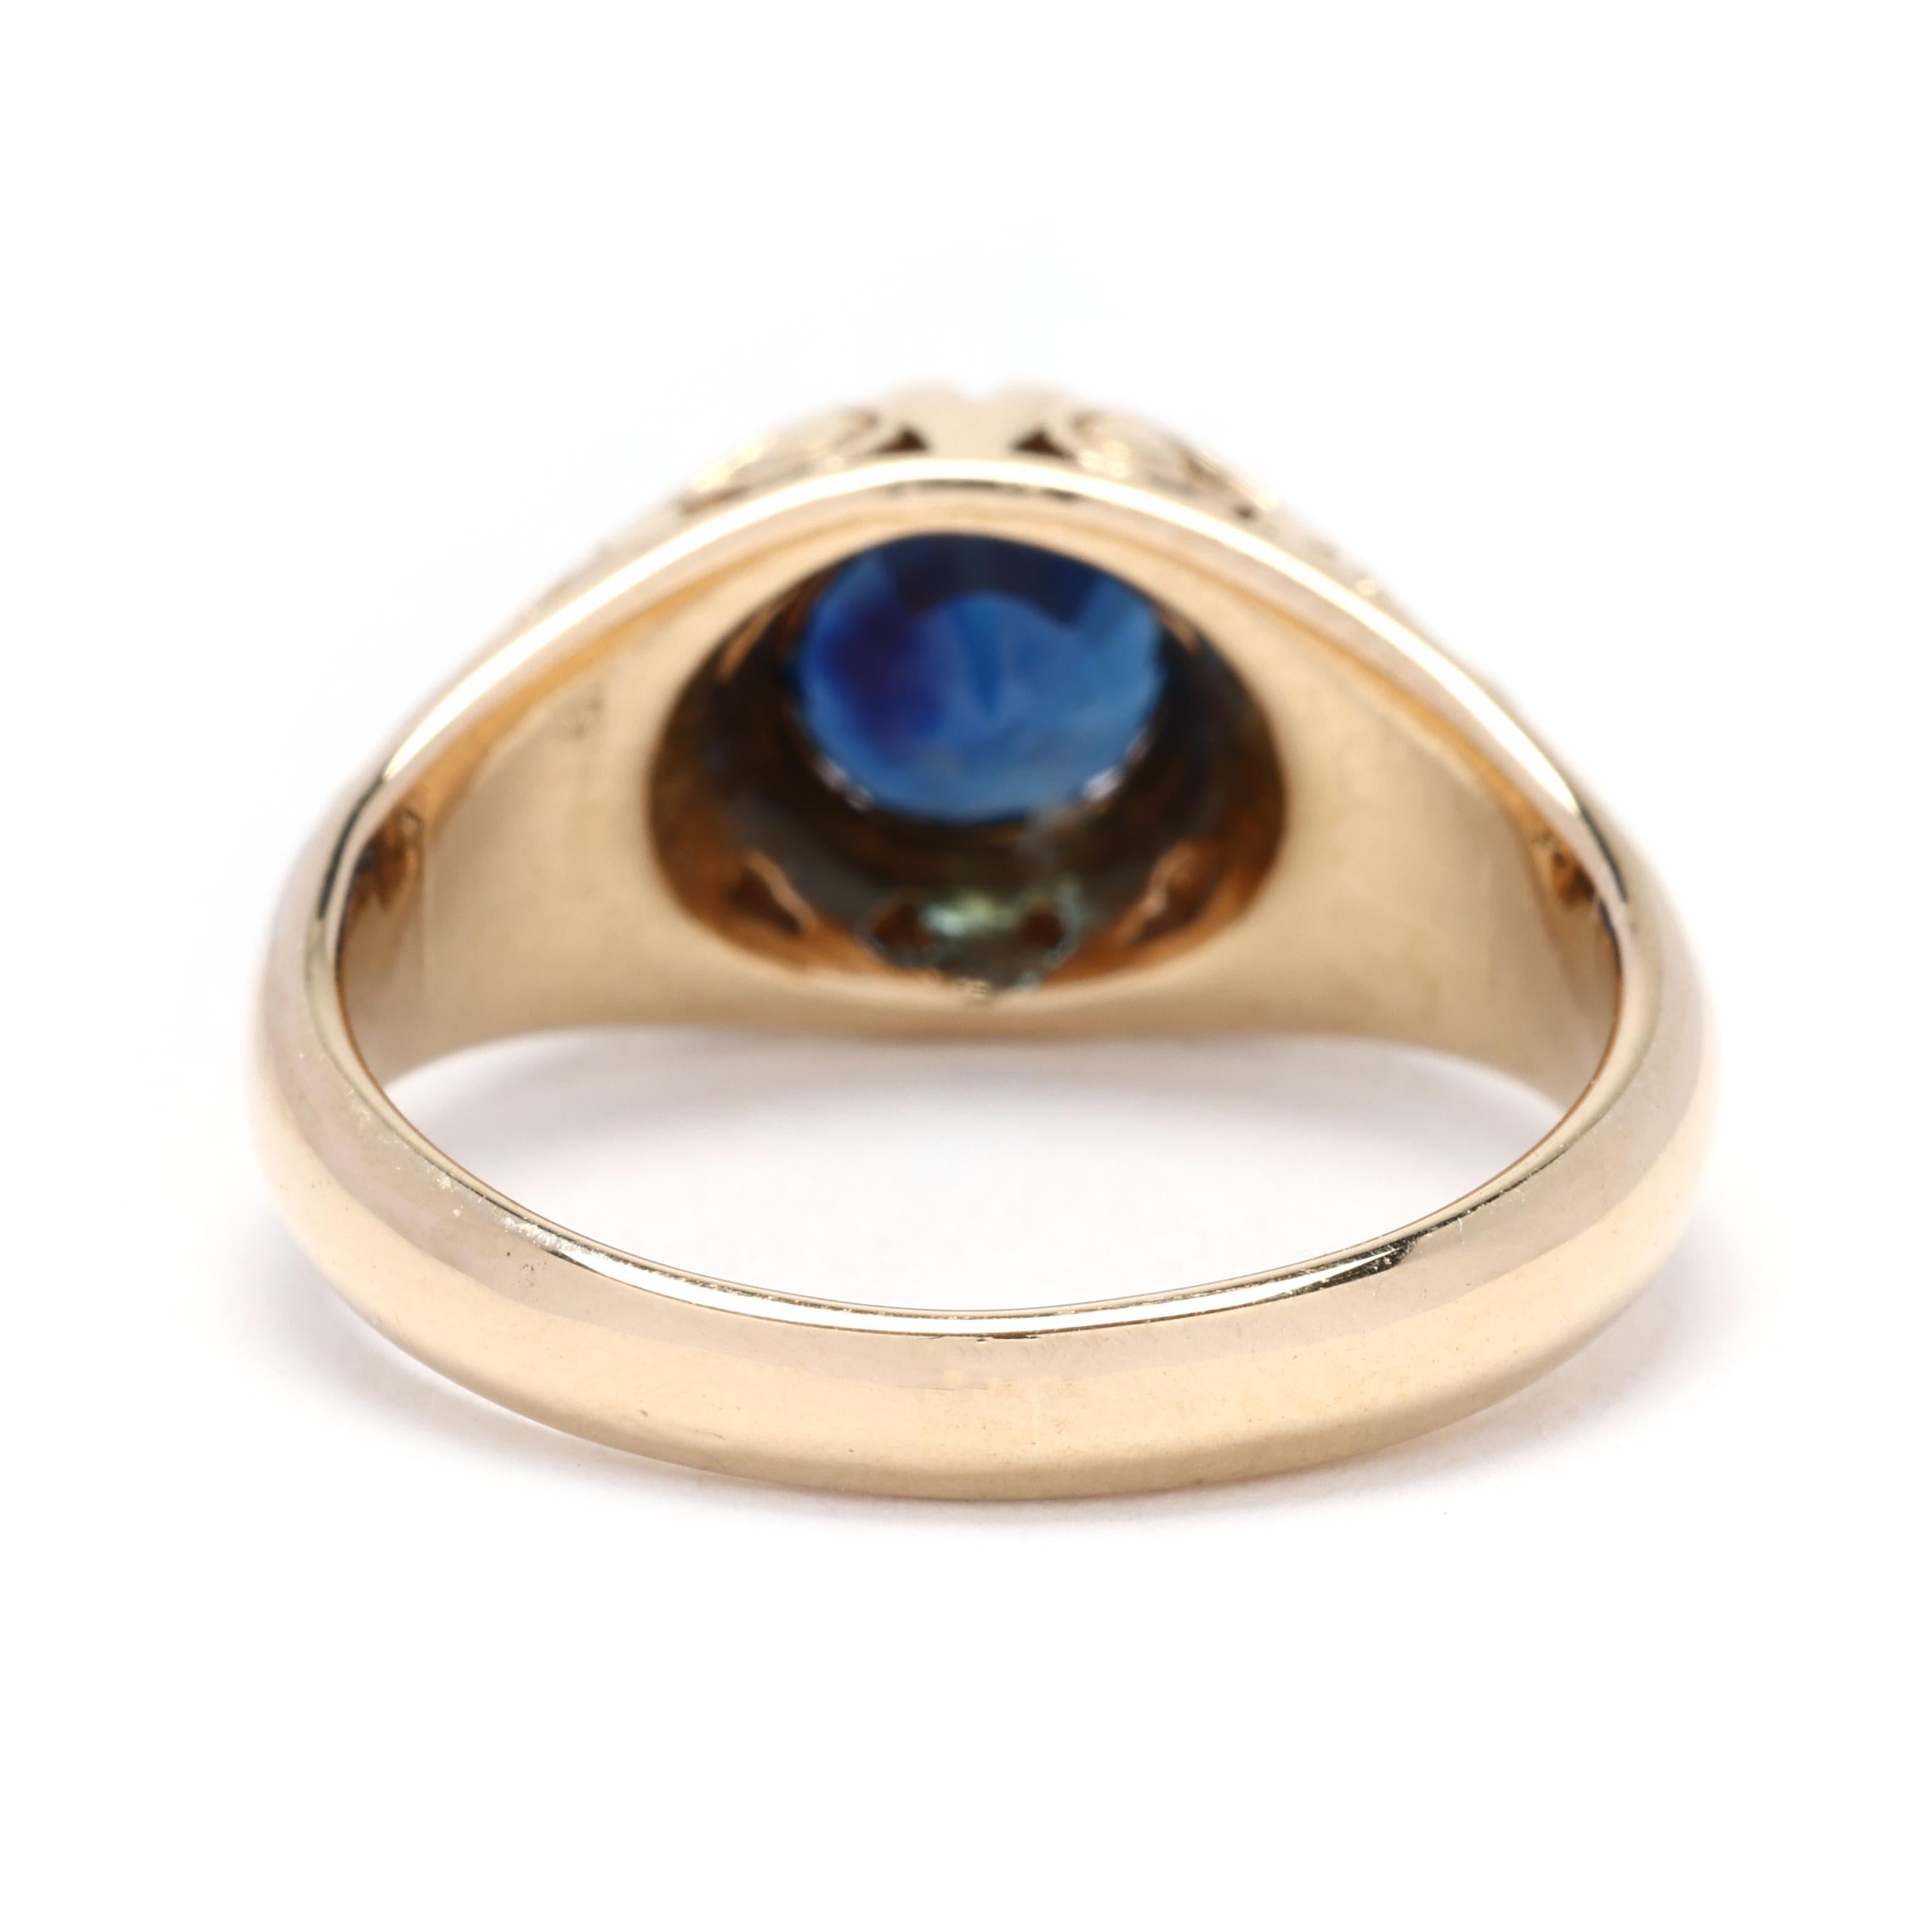 Round Cut 0.50ctw Sapphire Swirl Ring, 14k Yellow Gold, Ring Size 4.75, Antique Ring For Sale